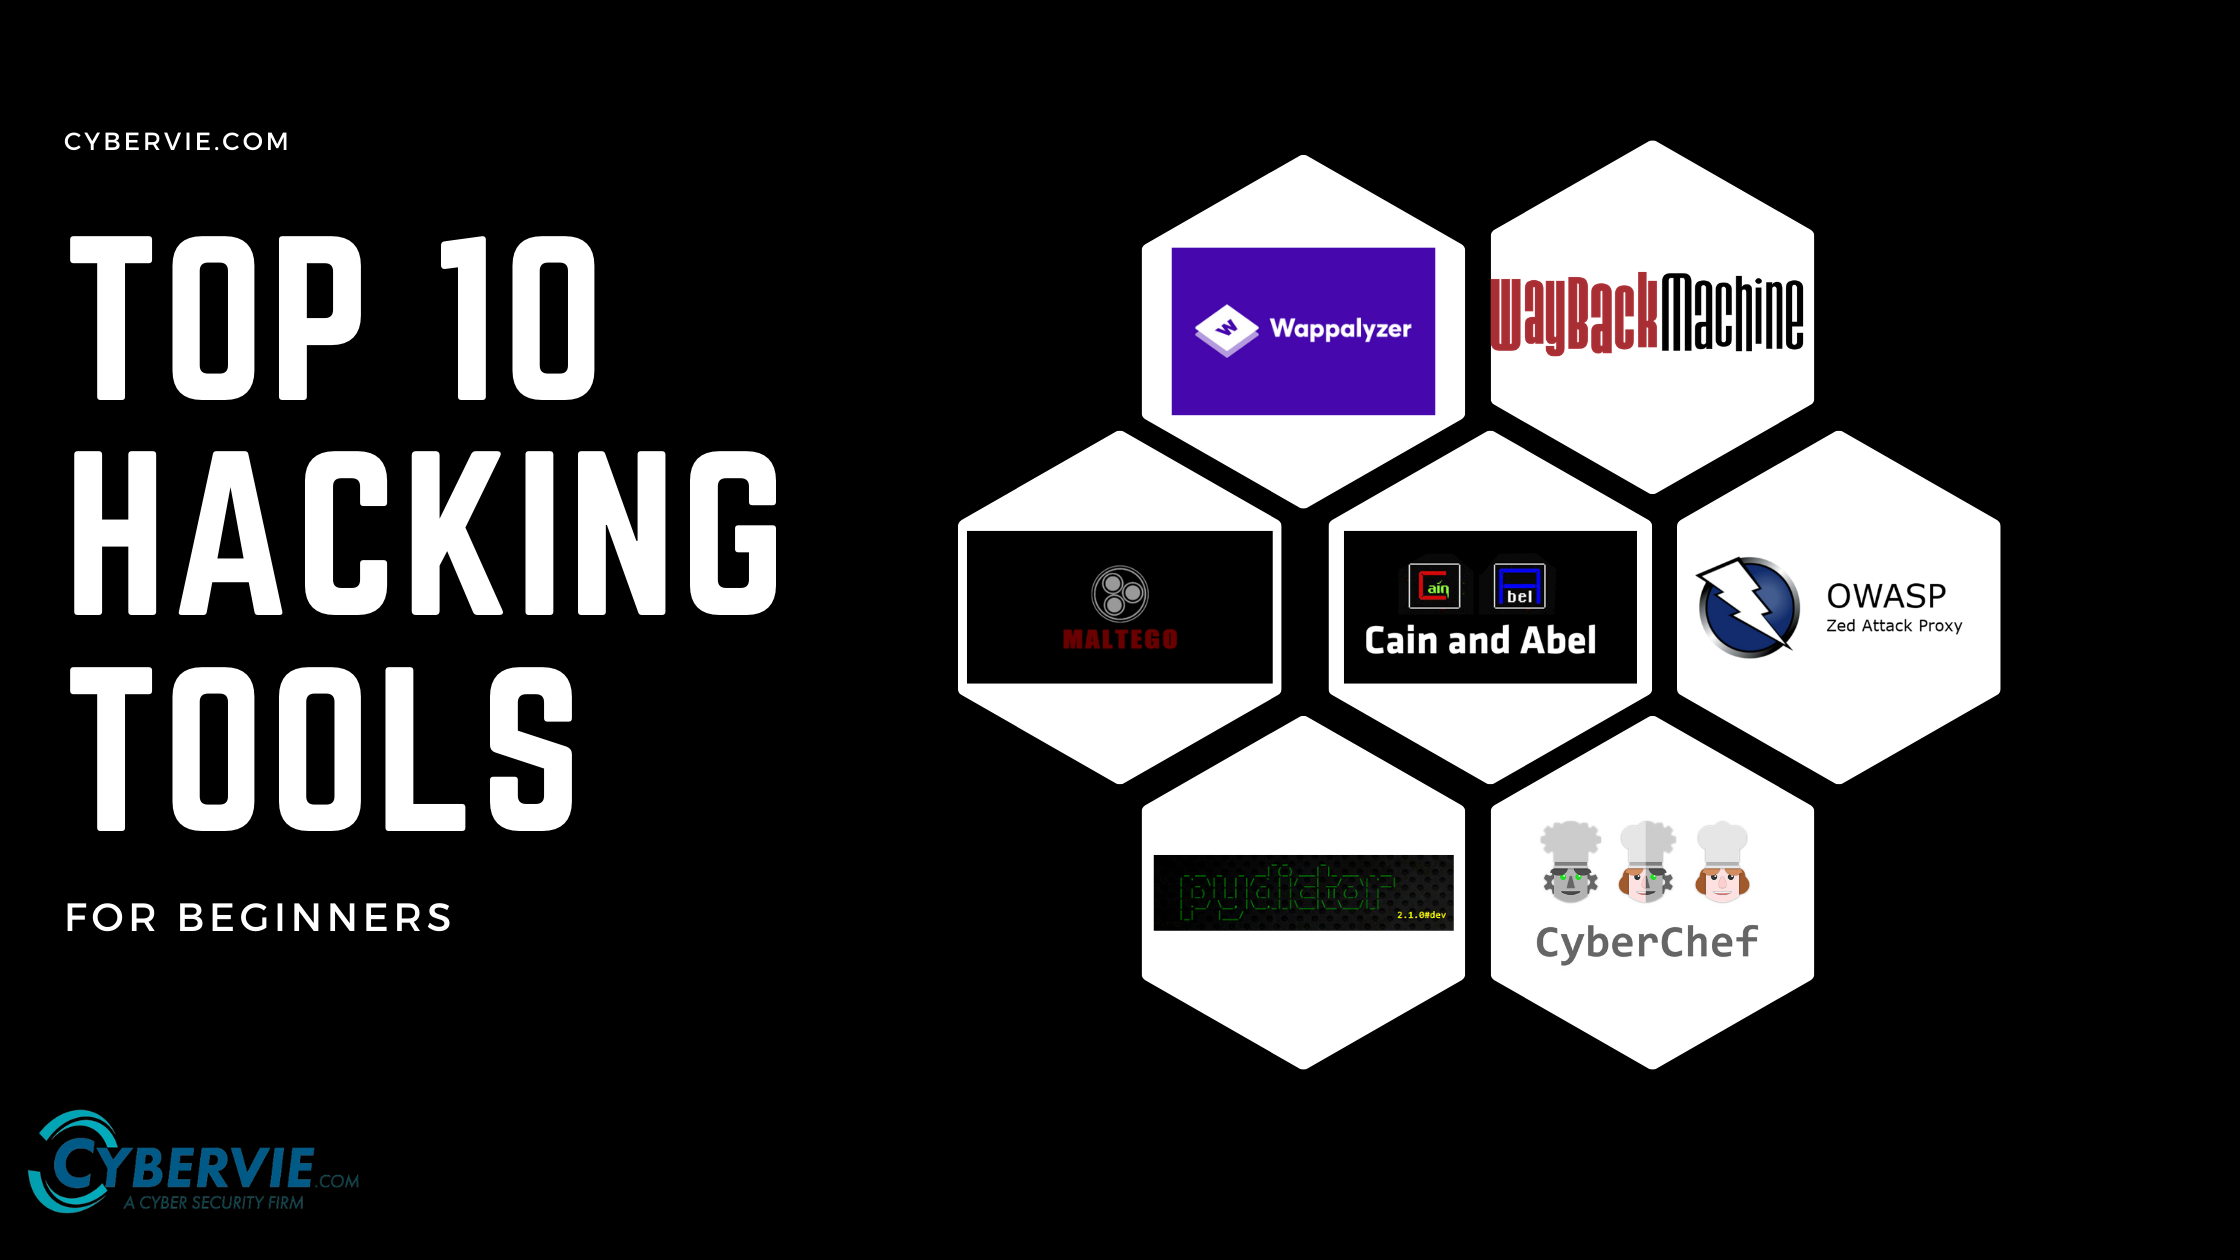 Top 10 most popular hacking tools for beginners